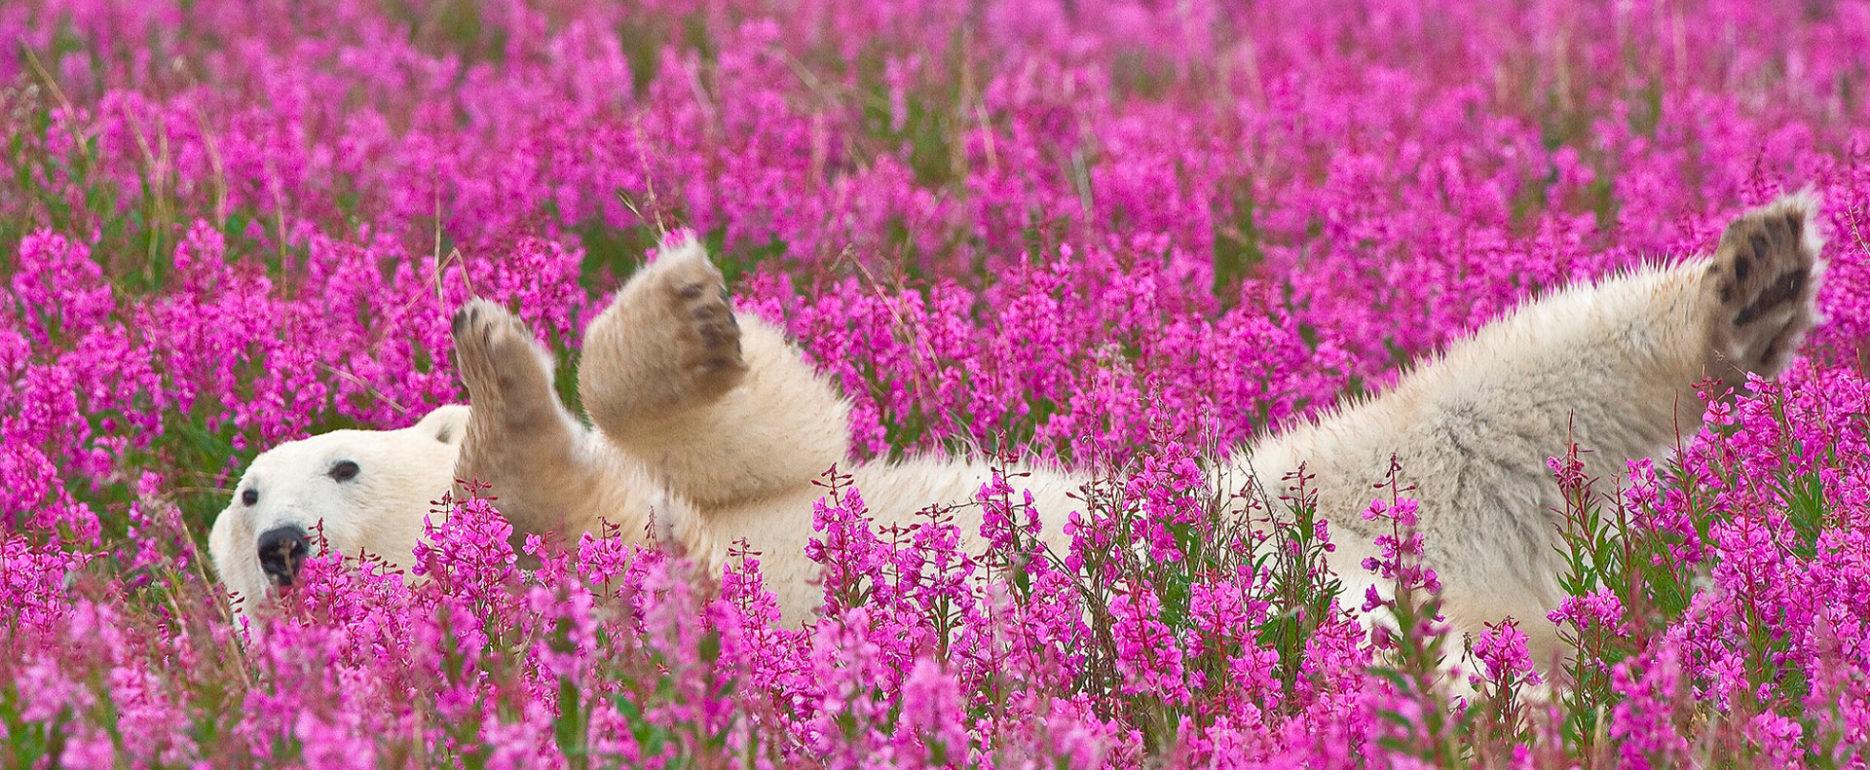 Polar bear frolicking in the fireweed. Dennis Fast photo.